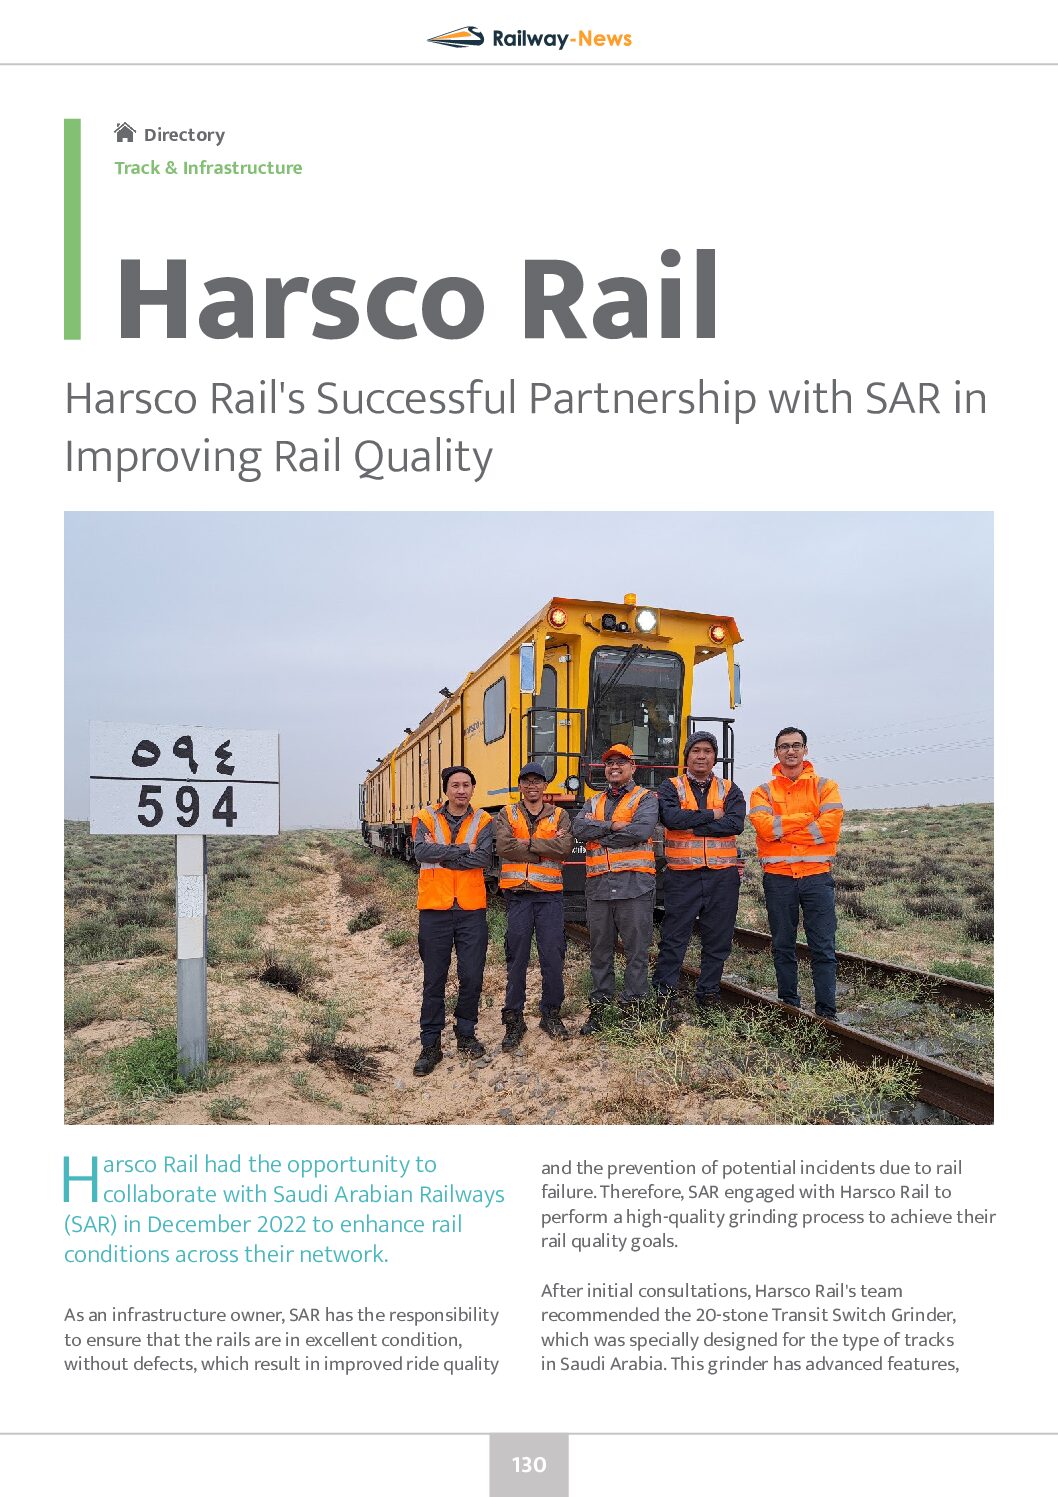 Harsco Rail’s Successful Partnership with SAR in Improving Rail Quality